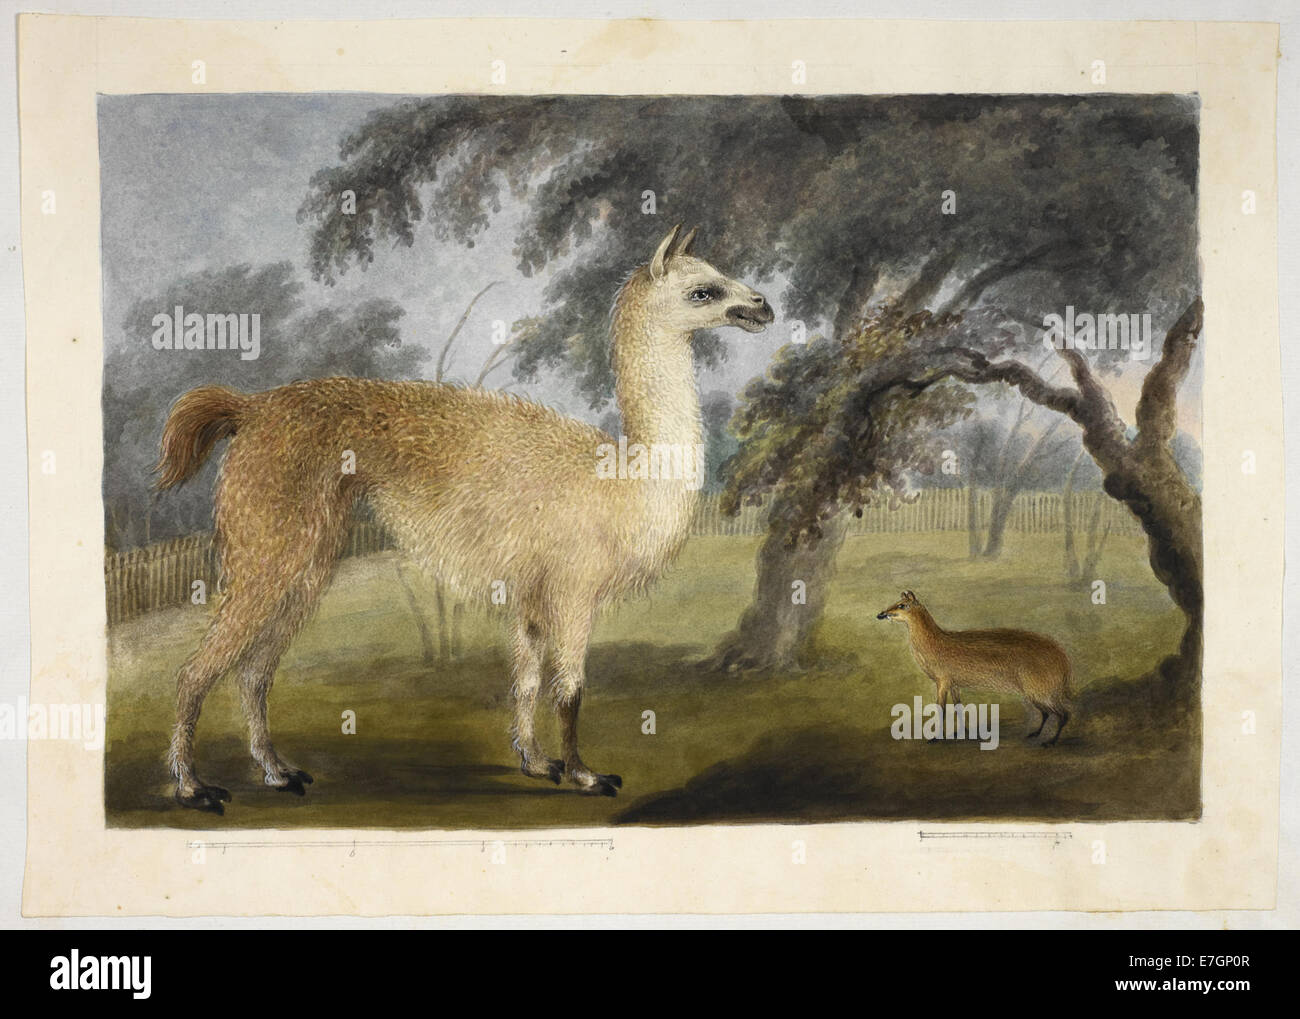 A llama and its young in a park, presumably Barrackpore - Hastings albums (1818-1820) - BL Add.Or.4953 Stock Photo